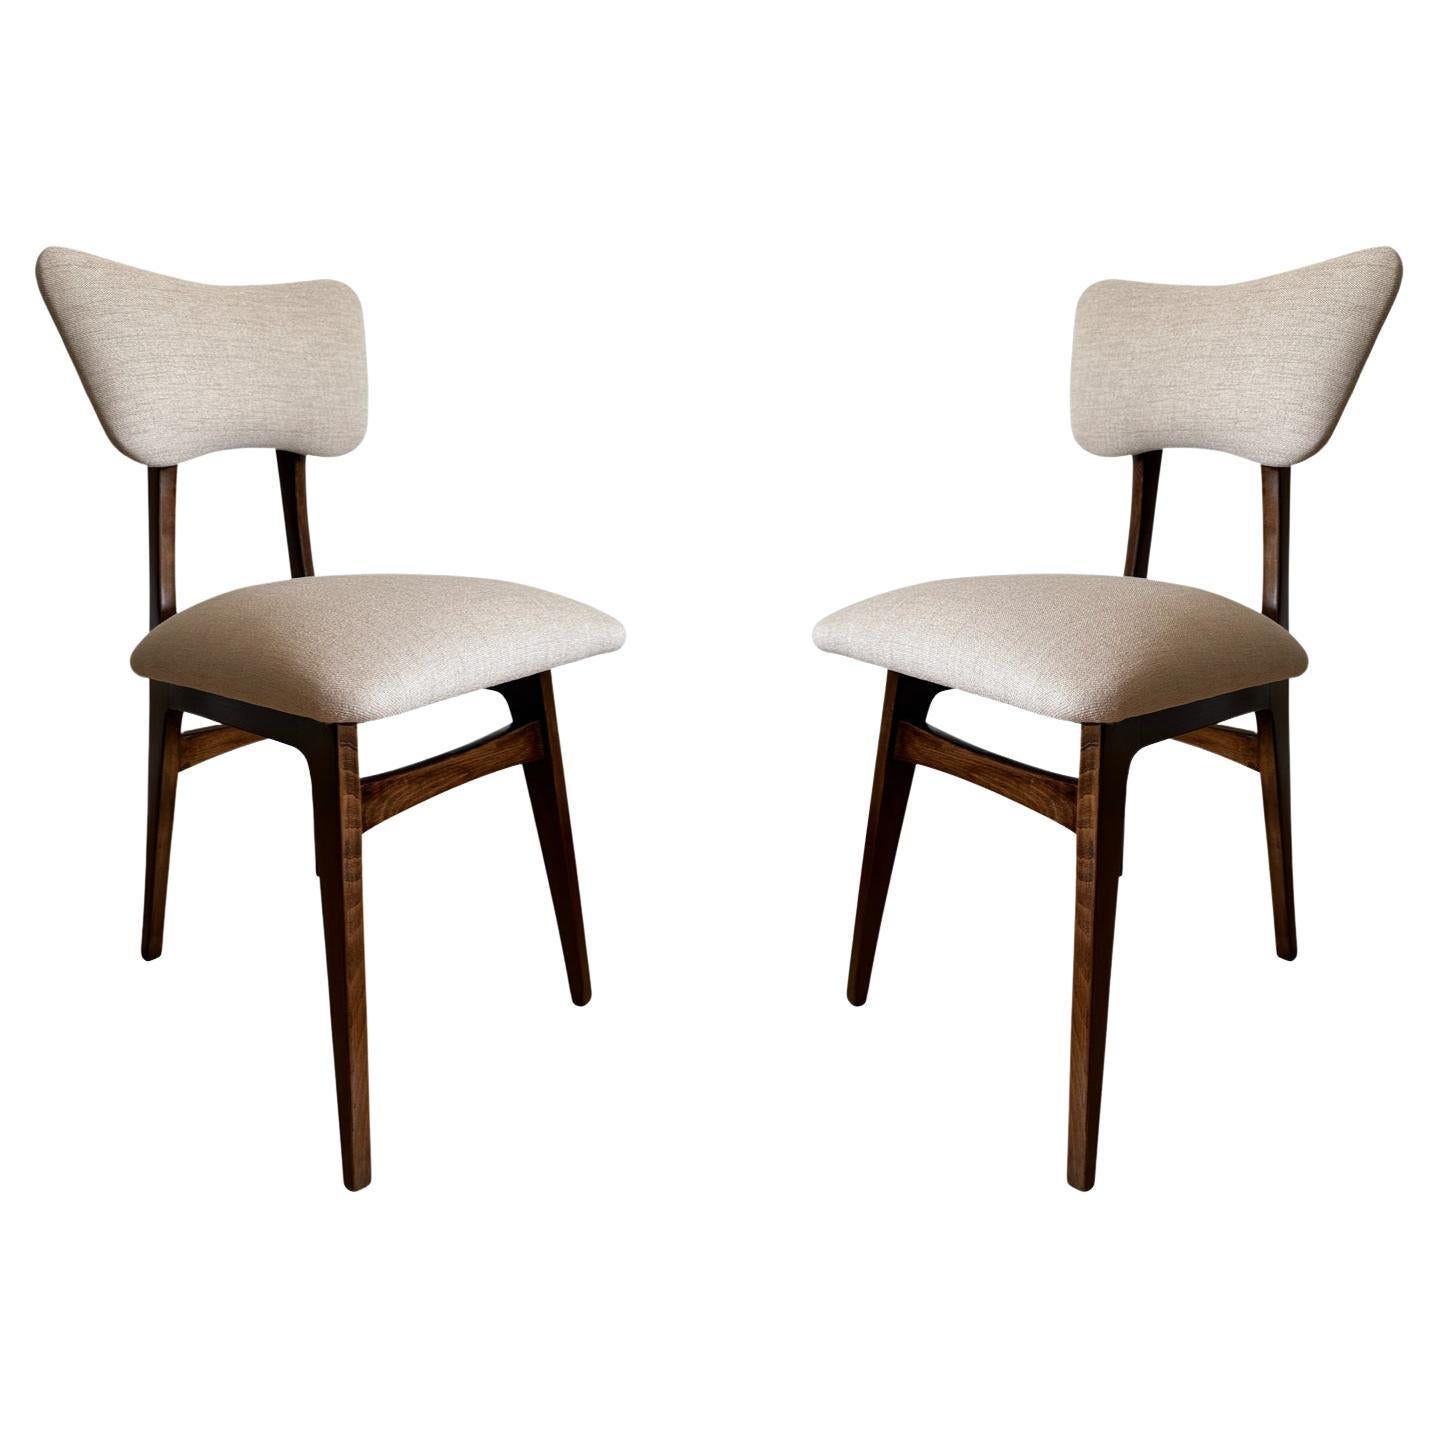 Set of Two Midcentury Beige Dining Chairs, Europe, 1960s For Sale